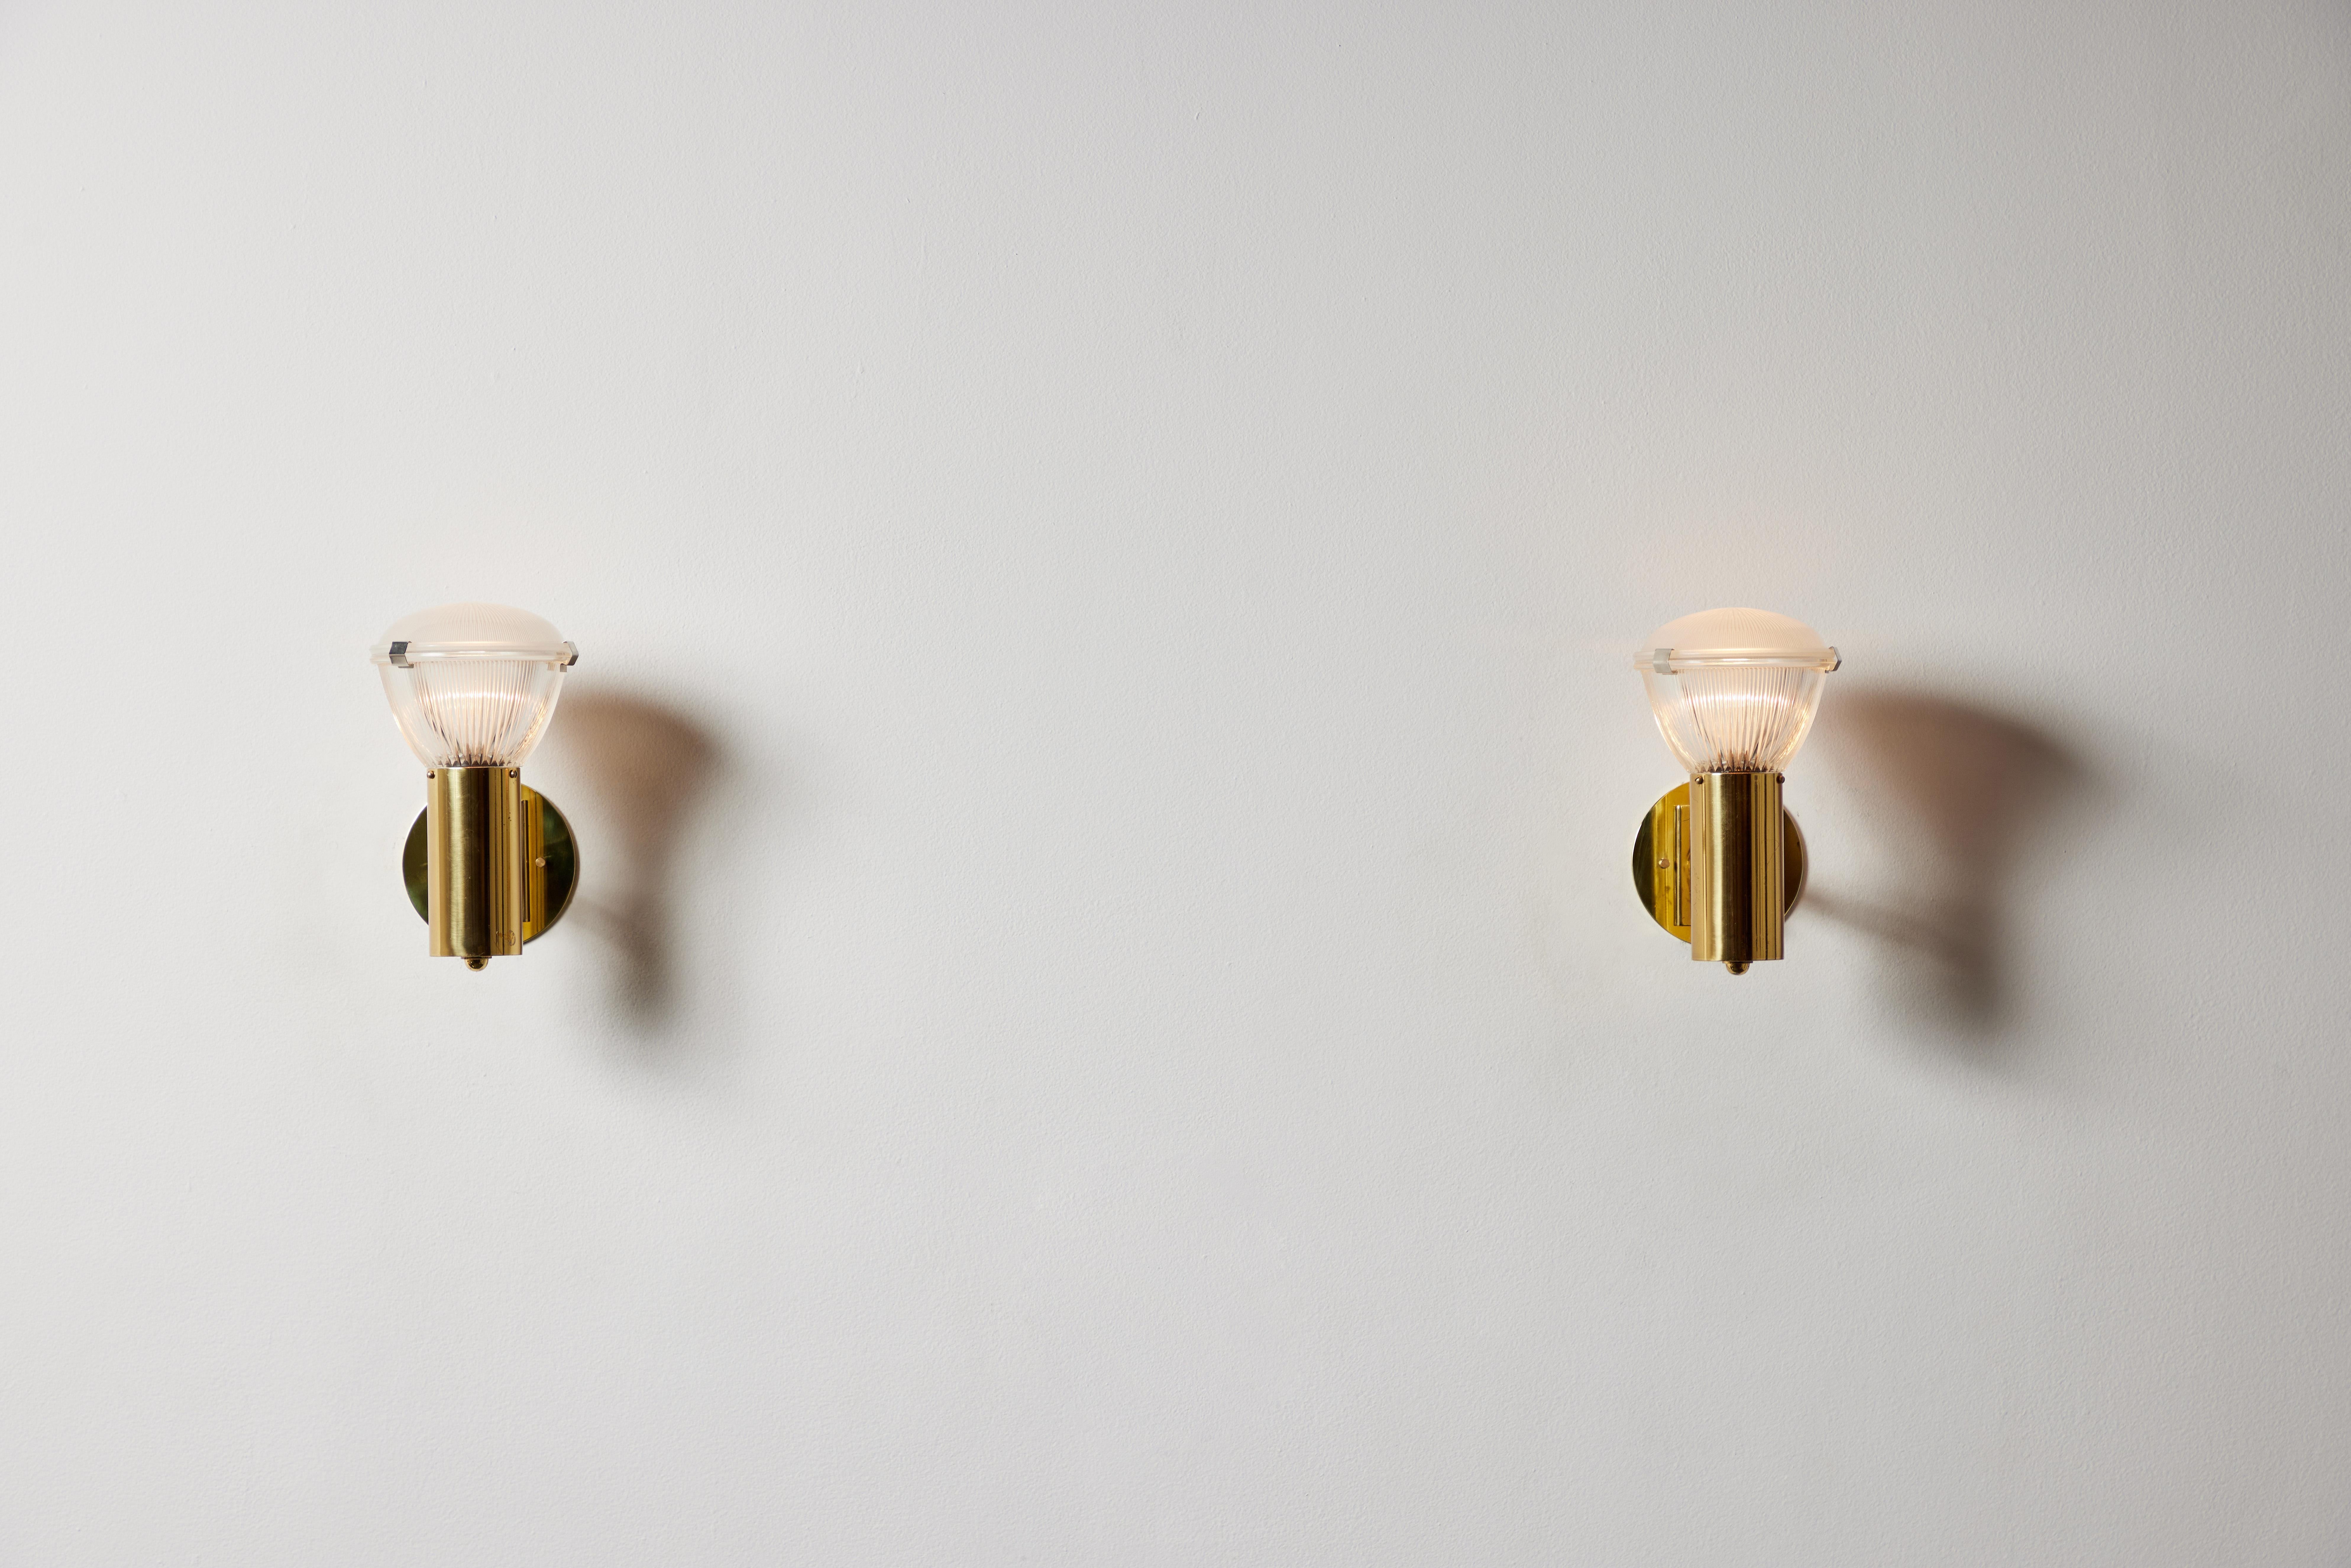 Pair of sconces by Stilnovo. Manufactured in Italy, circa 1960's brass, glass. Custom brass backplates. Rewired for U.S. standards.
We recommend one E27 75w maximum bulb per fixture. Bulbs provided as a one time courtesy.